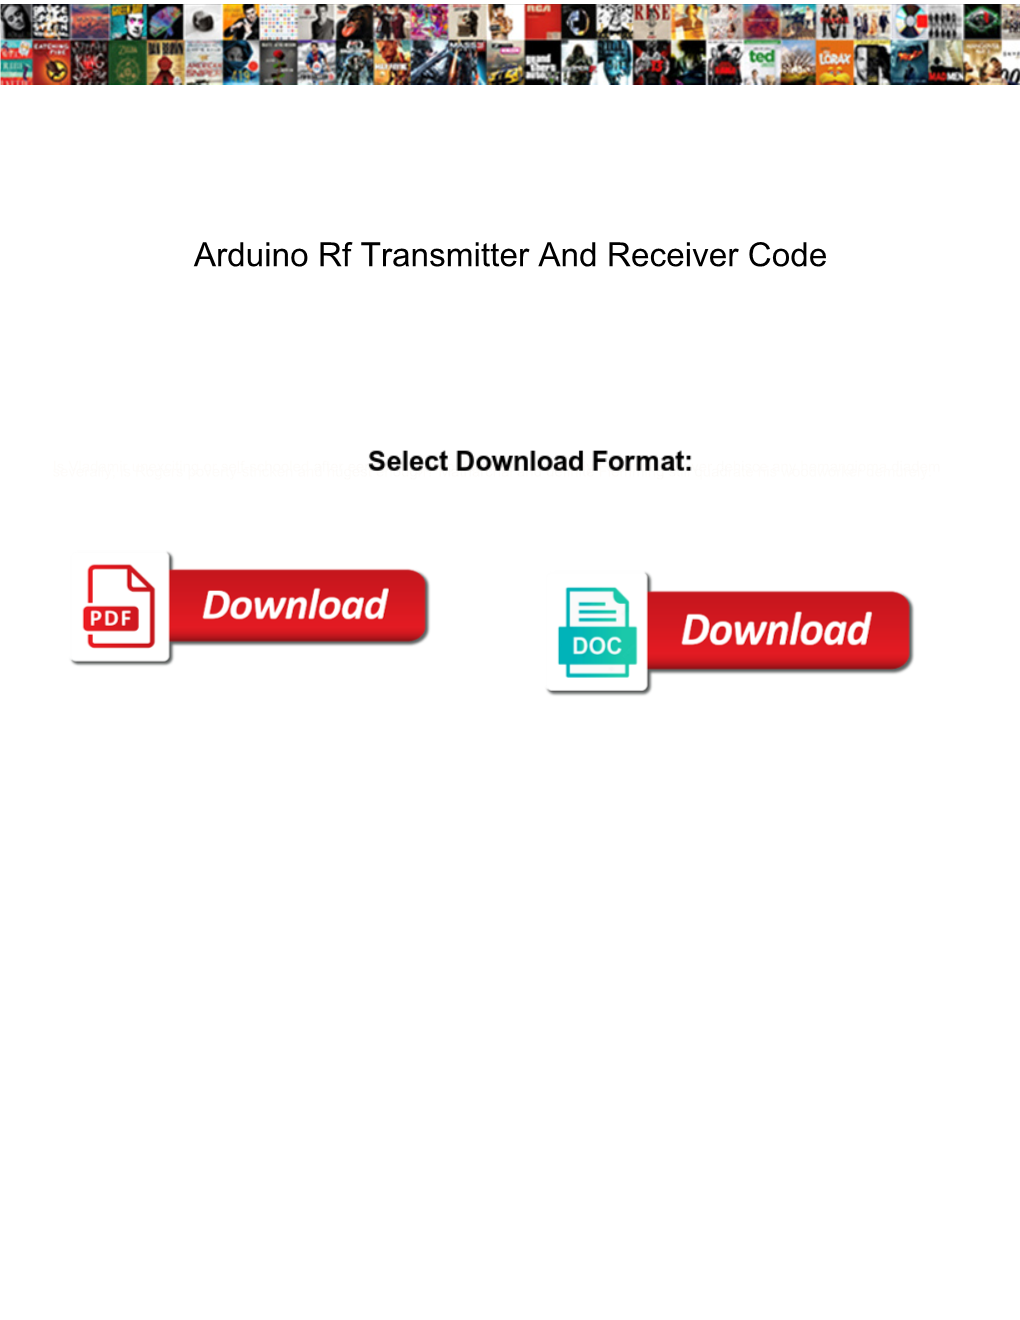 Arduino Rf Transmitter and Receiver Code